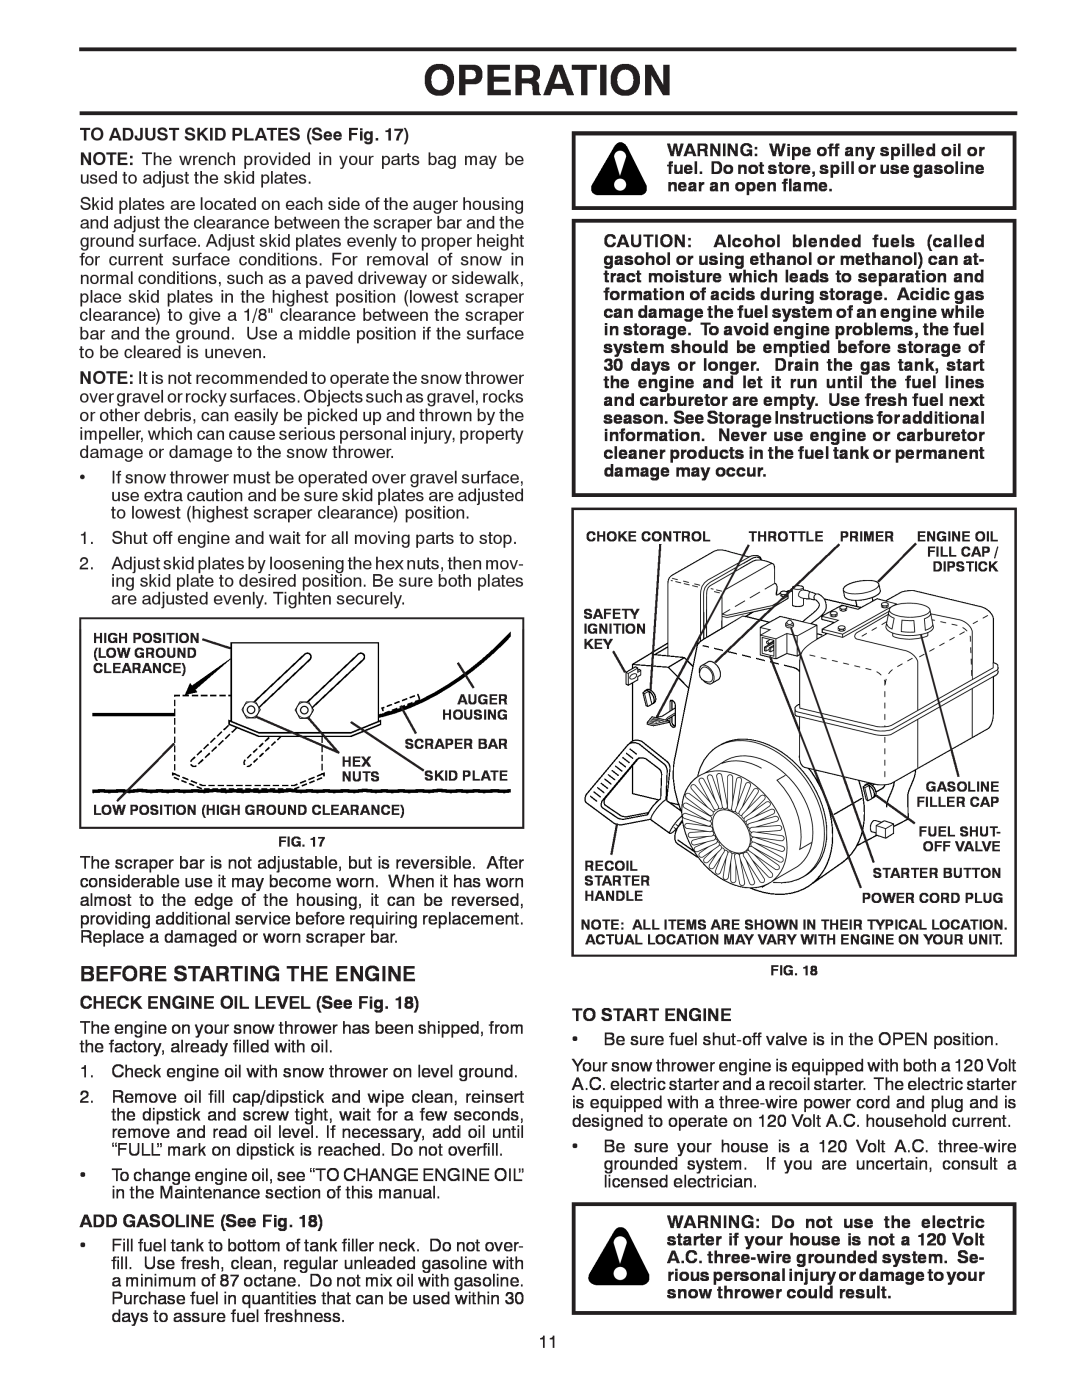 Poulan PR5524ES Before Starting The Engine, Operation, Scraper Bar, CHECK ENGINE OIL LEVEL See Fig, ADD GASOLINE See Fig 